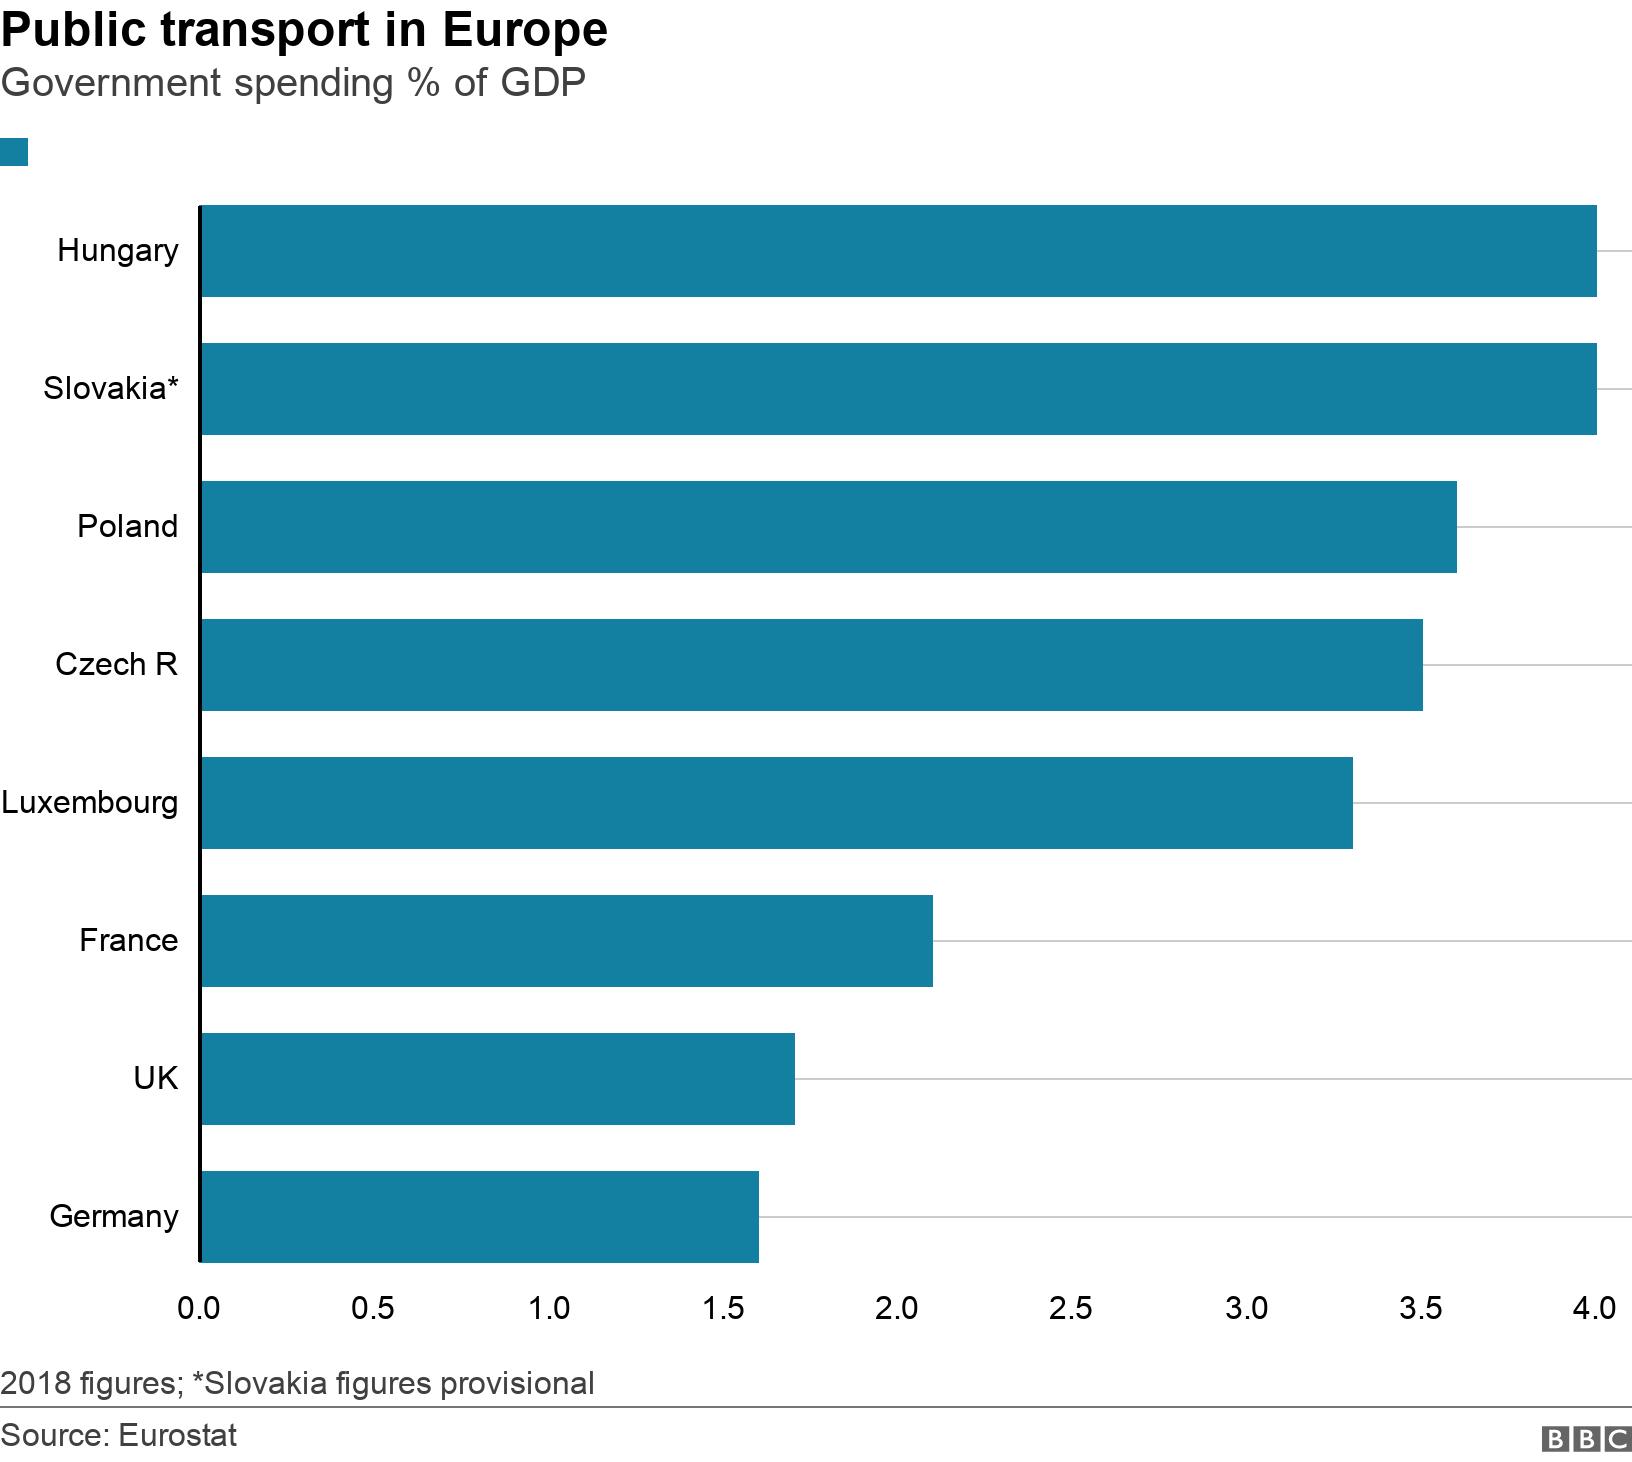 Public transport in Europe. Government spending % of GDP. 2018 figures; *Slovakia figures provisional.